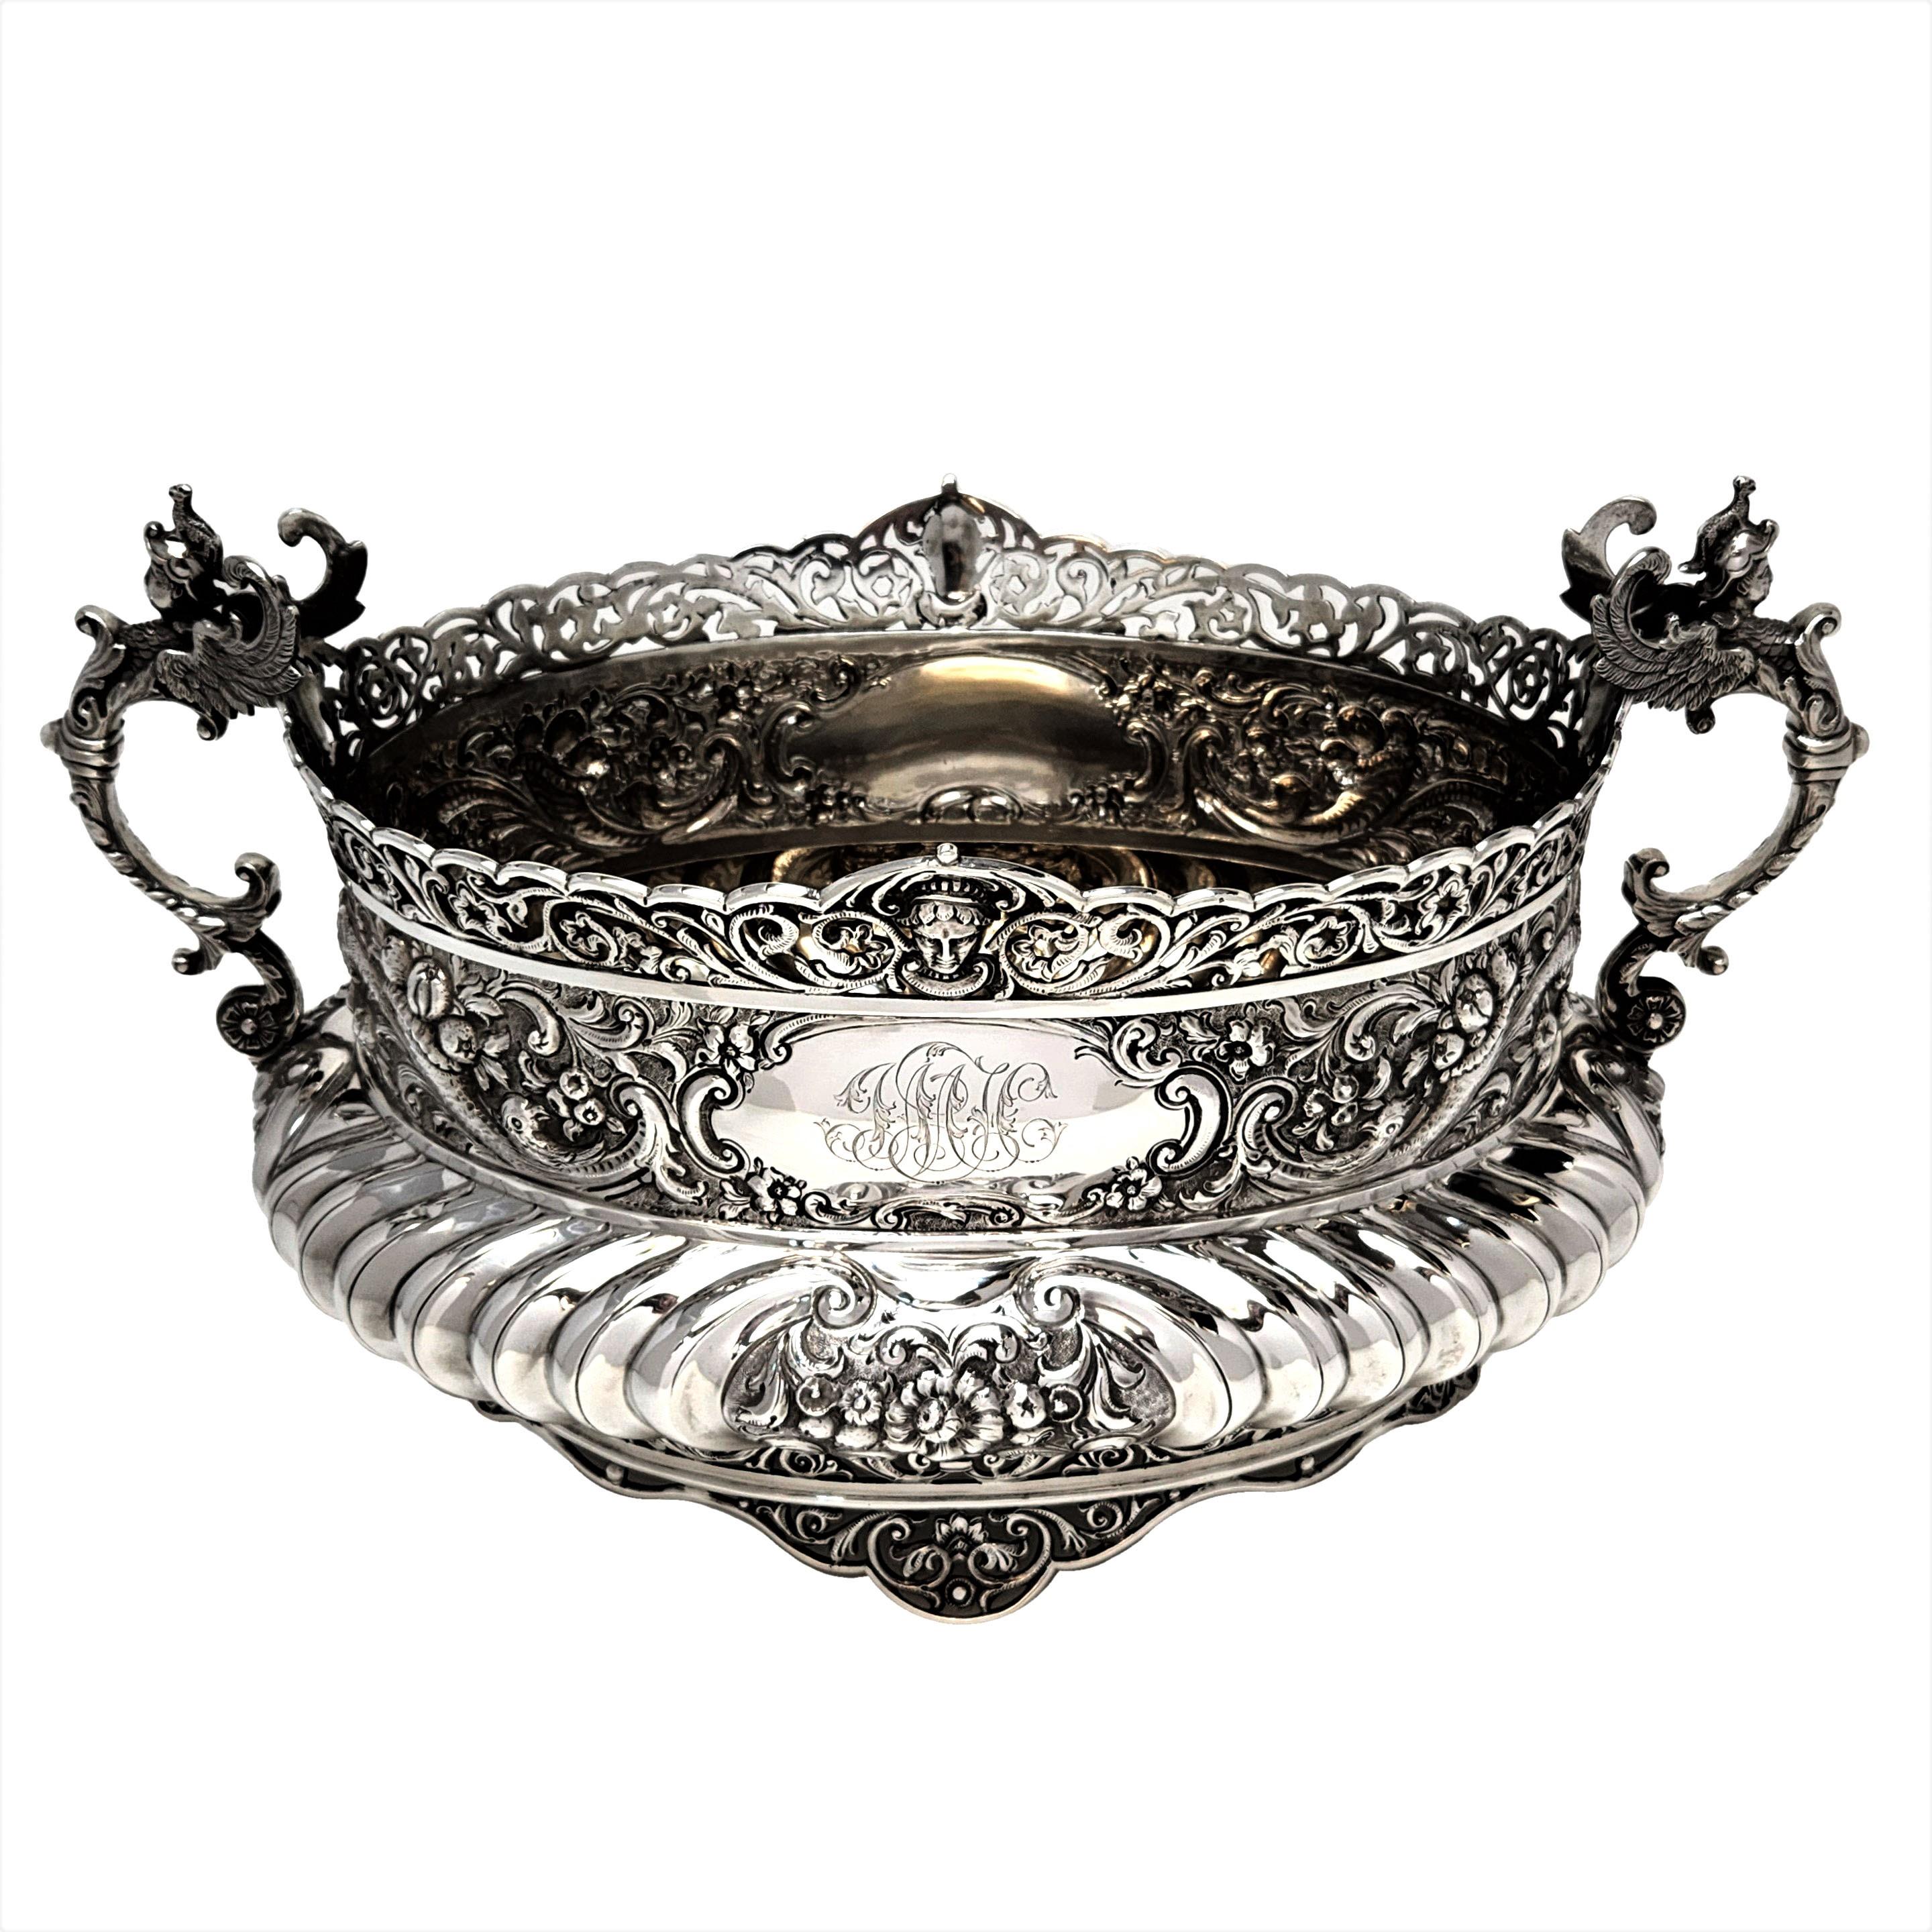 An impressive Antique Victorian solid Silver Centrepiece Bowl standing on a removable black oval plinth. The Silver Bowl has an oval shape and is decorated with ornate chased and pieced designs. The Centrepiece has two cartouches - one plain and one